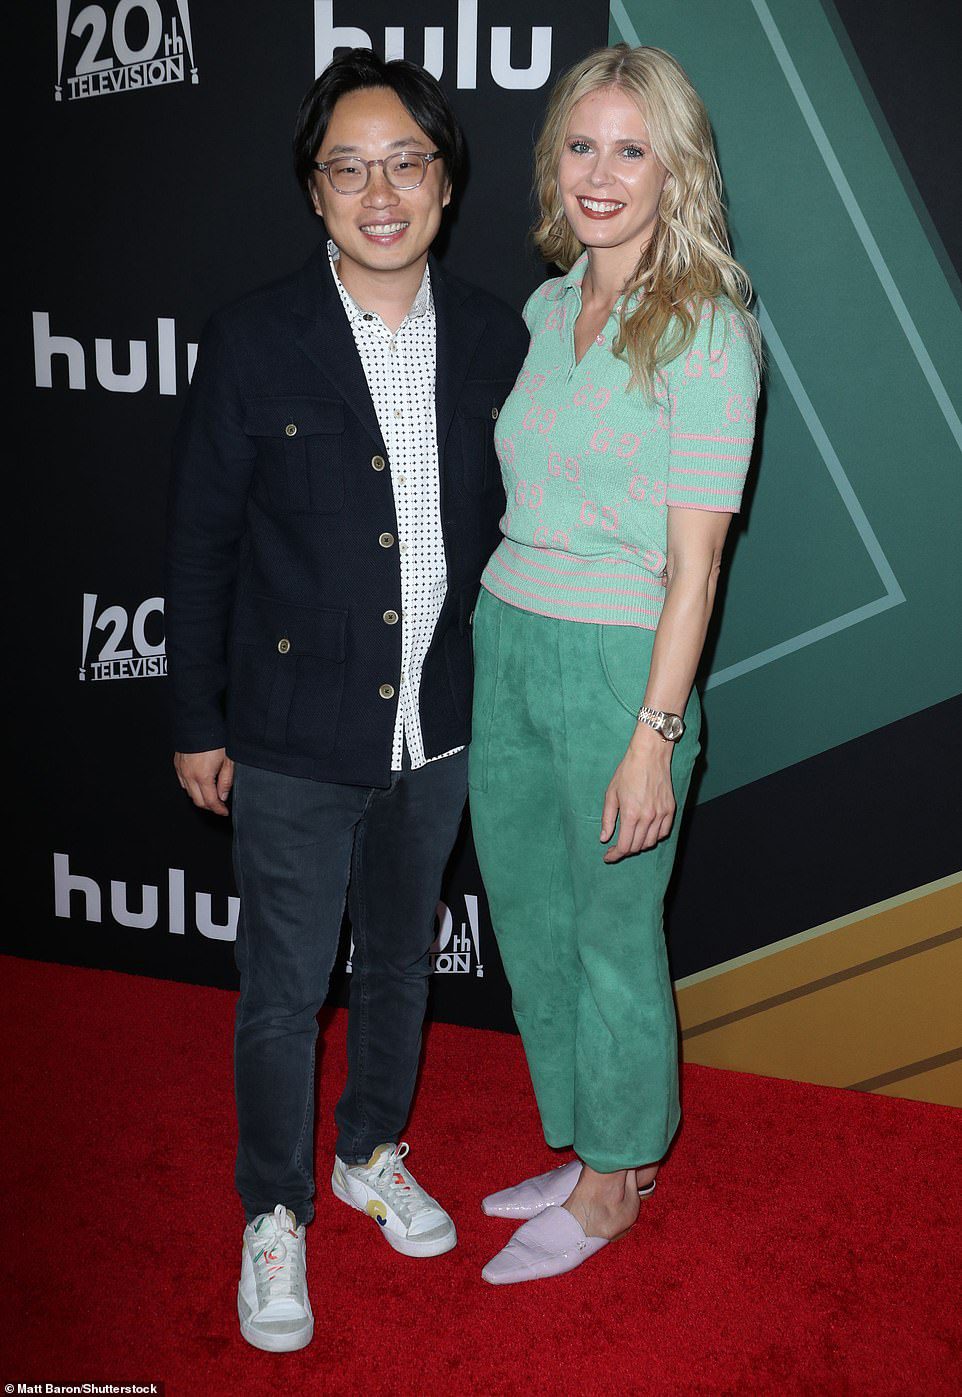 Jimmy and Bri: Jimmy O. Yang hit the red carpet with his girlfriend Bri Kimmel